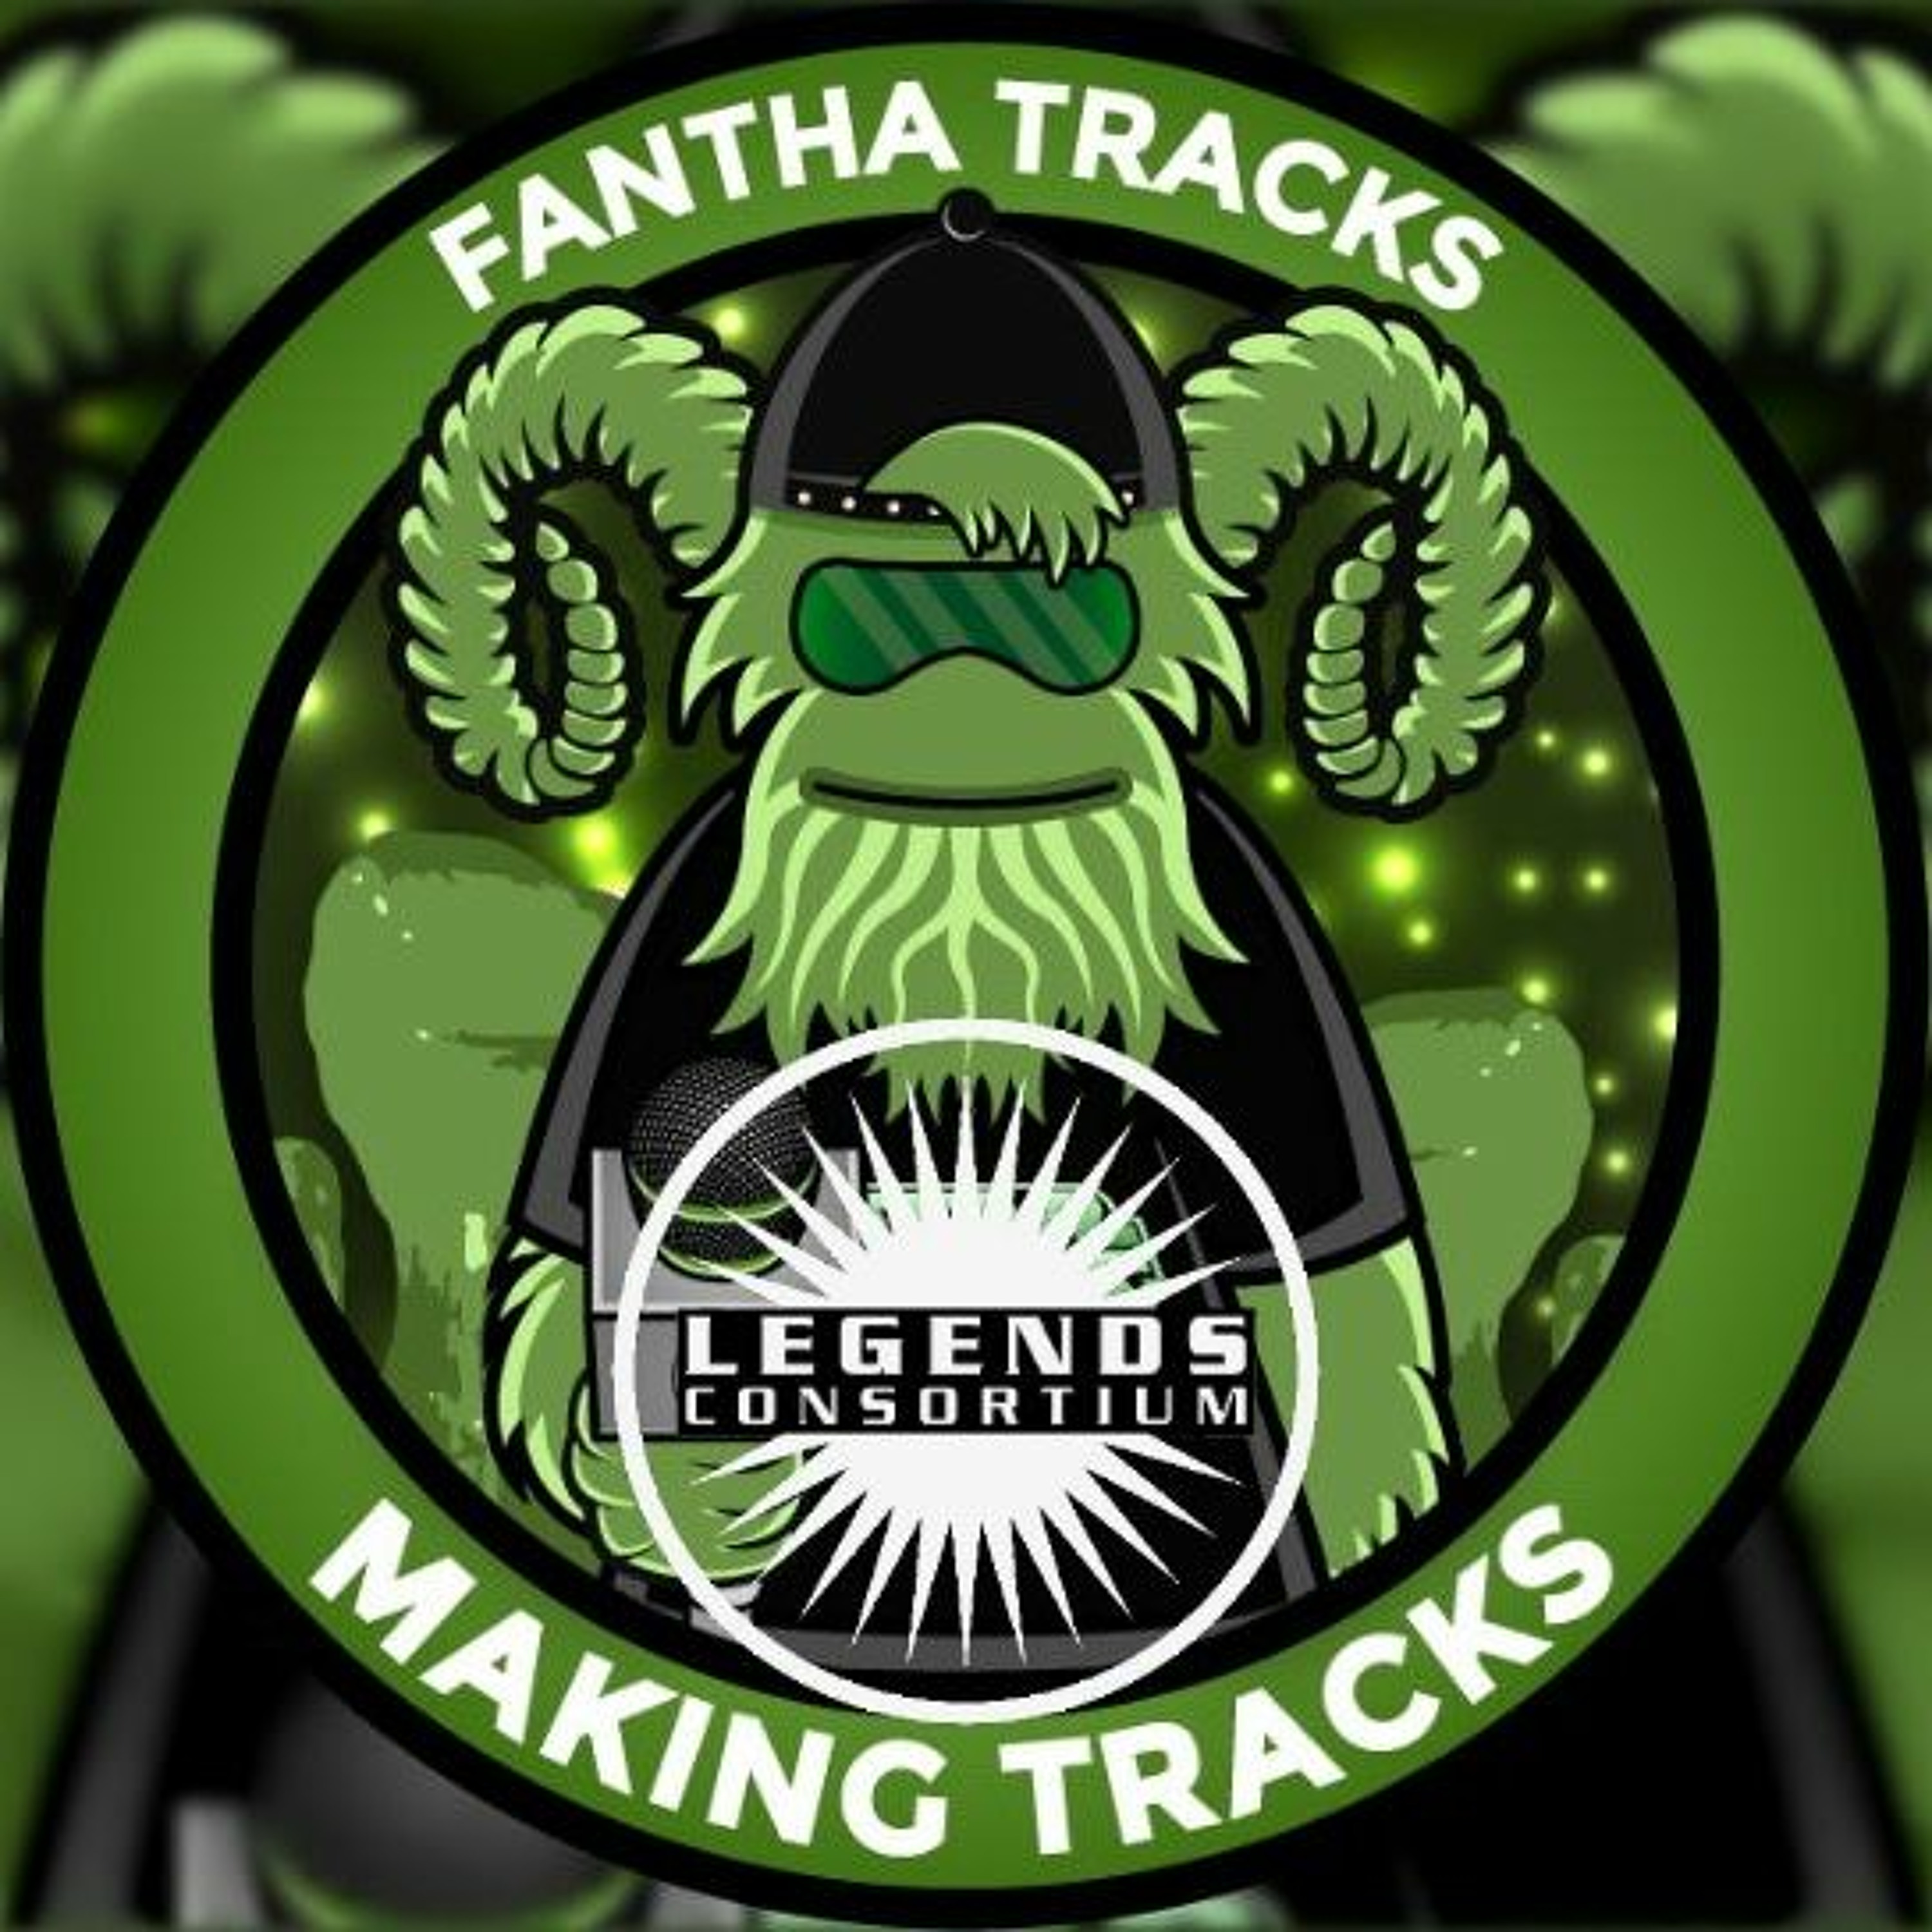 Making Tracks Episode 168: At first blush : With guests Michael Jibson and Katherine Winchell